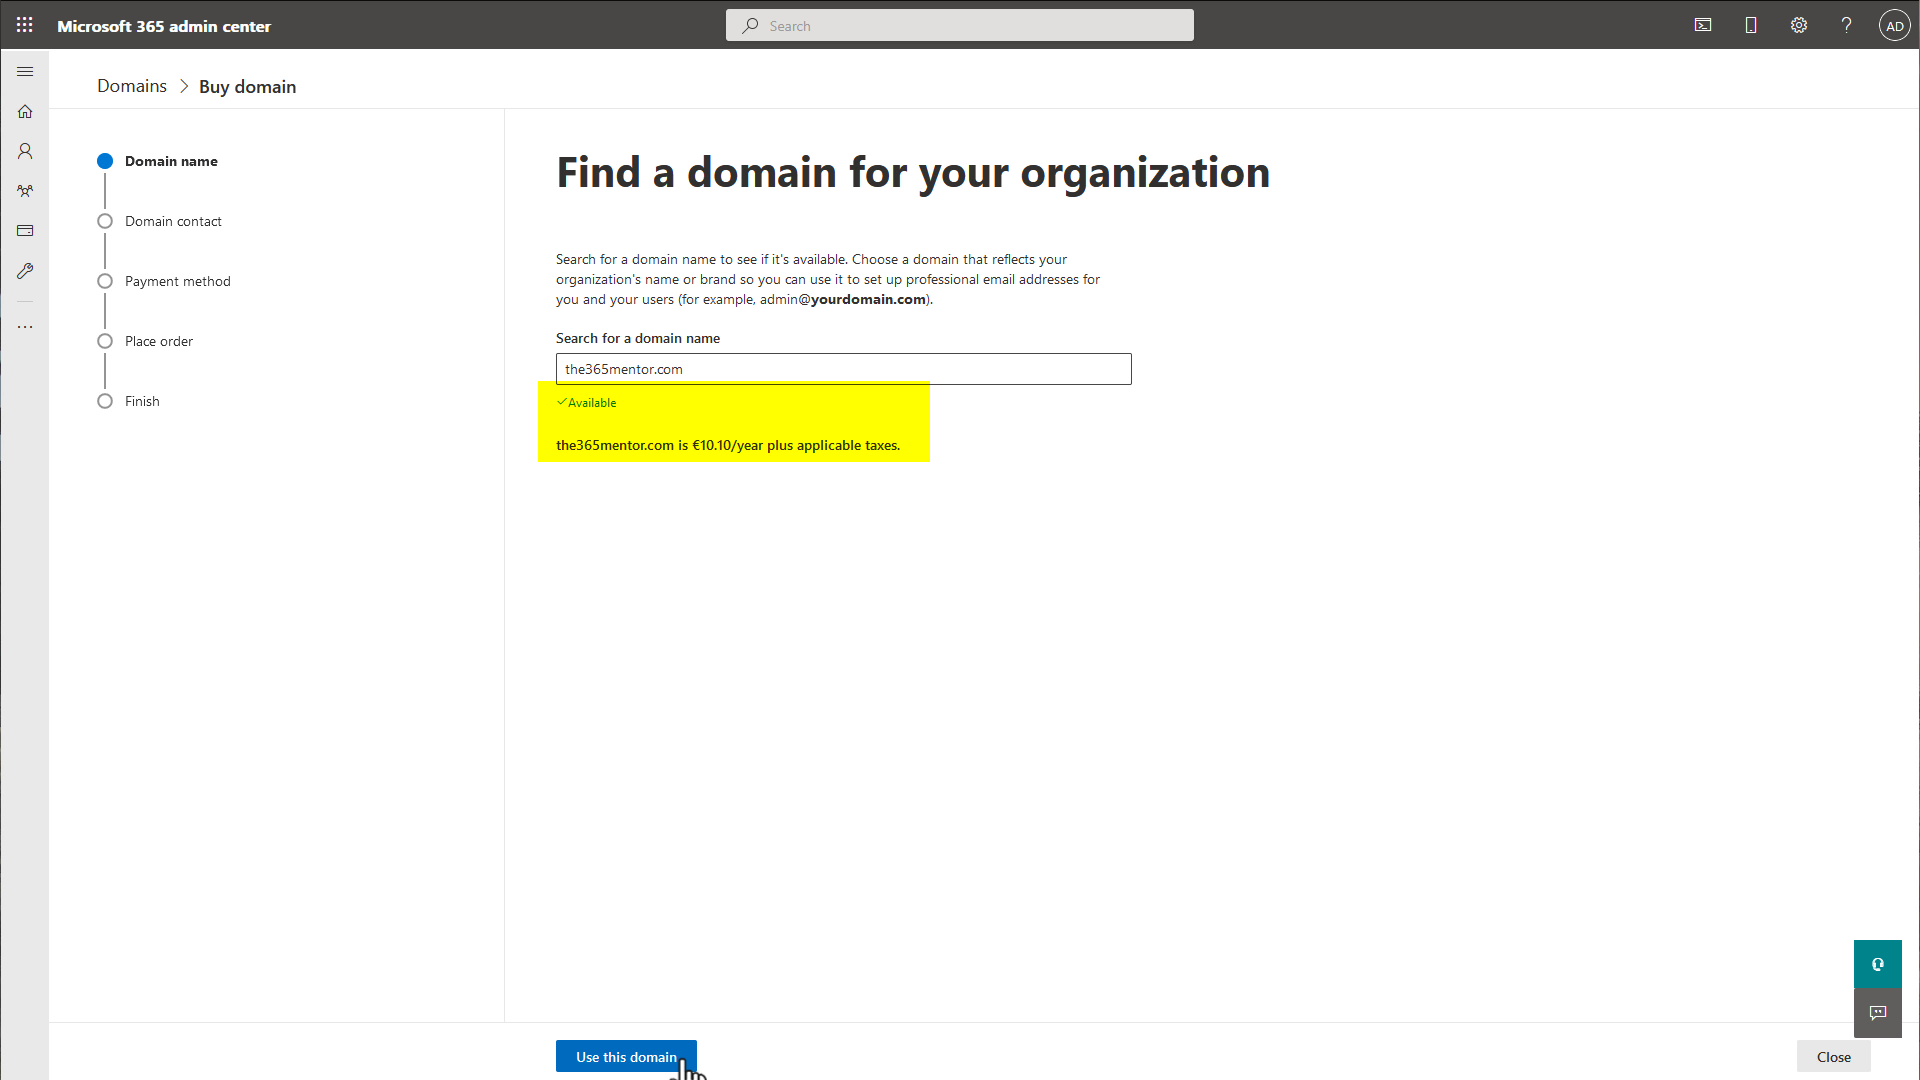 Buying a domain with Microsoft 365 - Price information